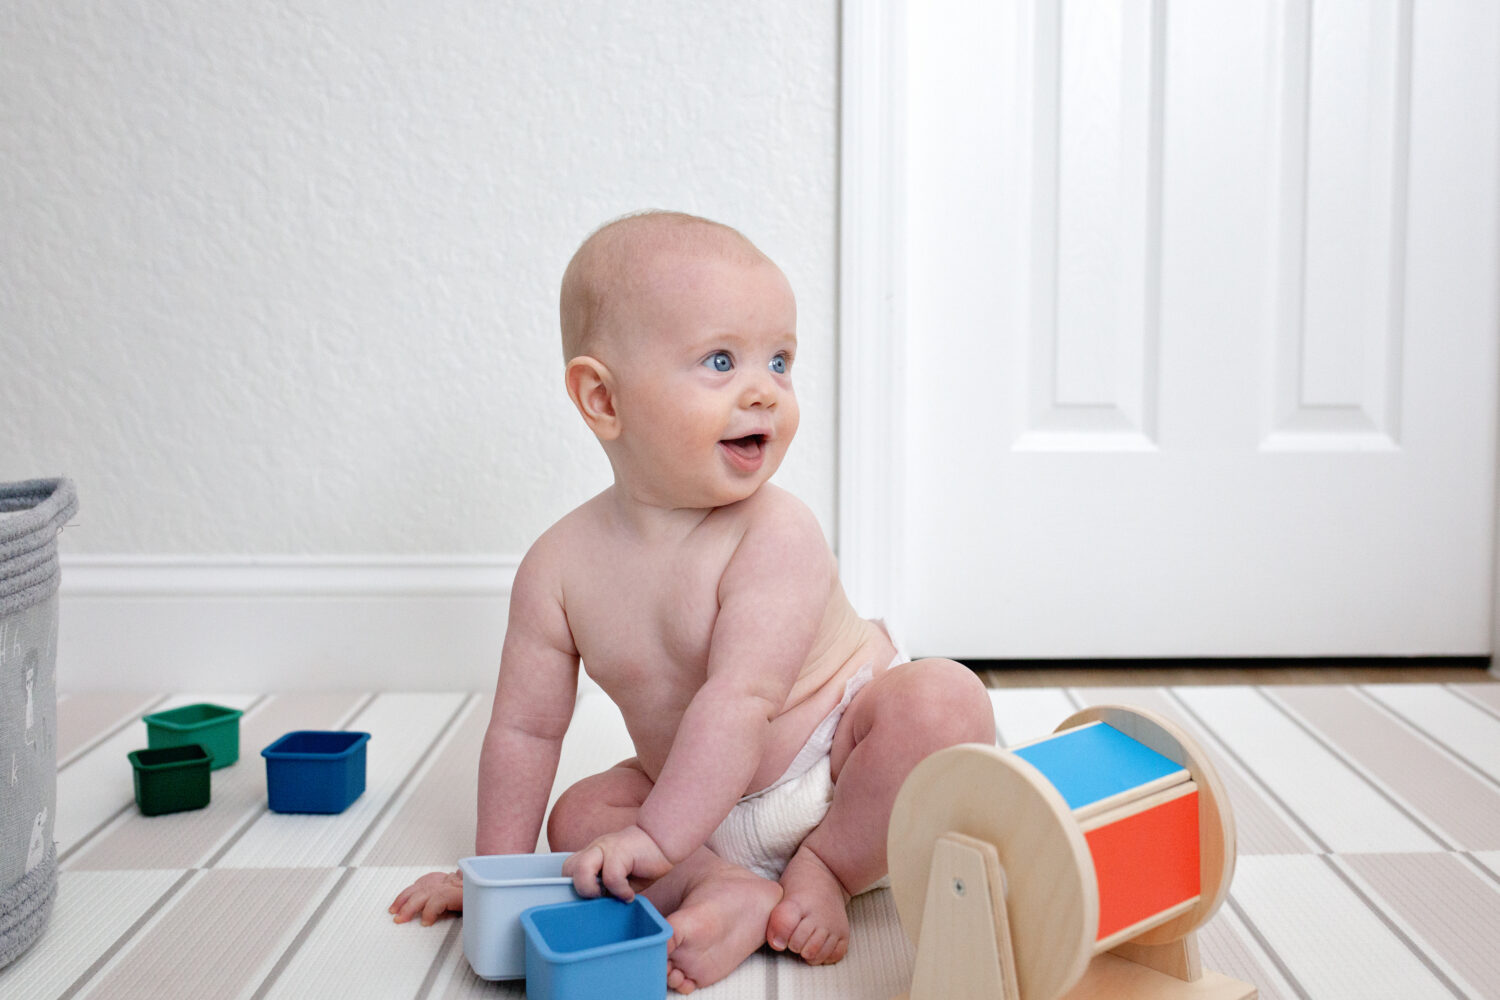 Laughing blue eyed baby sitting and playing with wooden toys